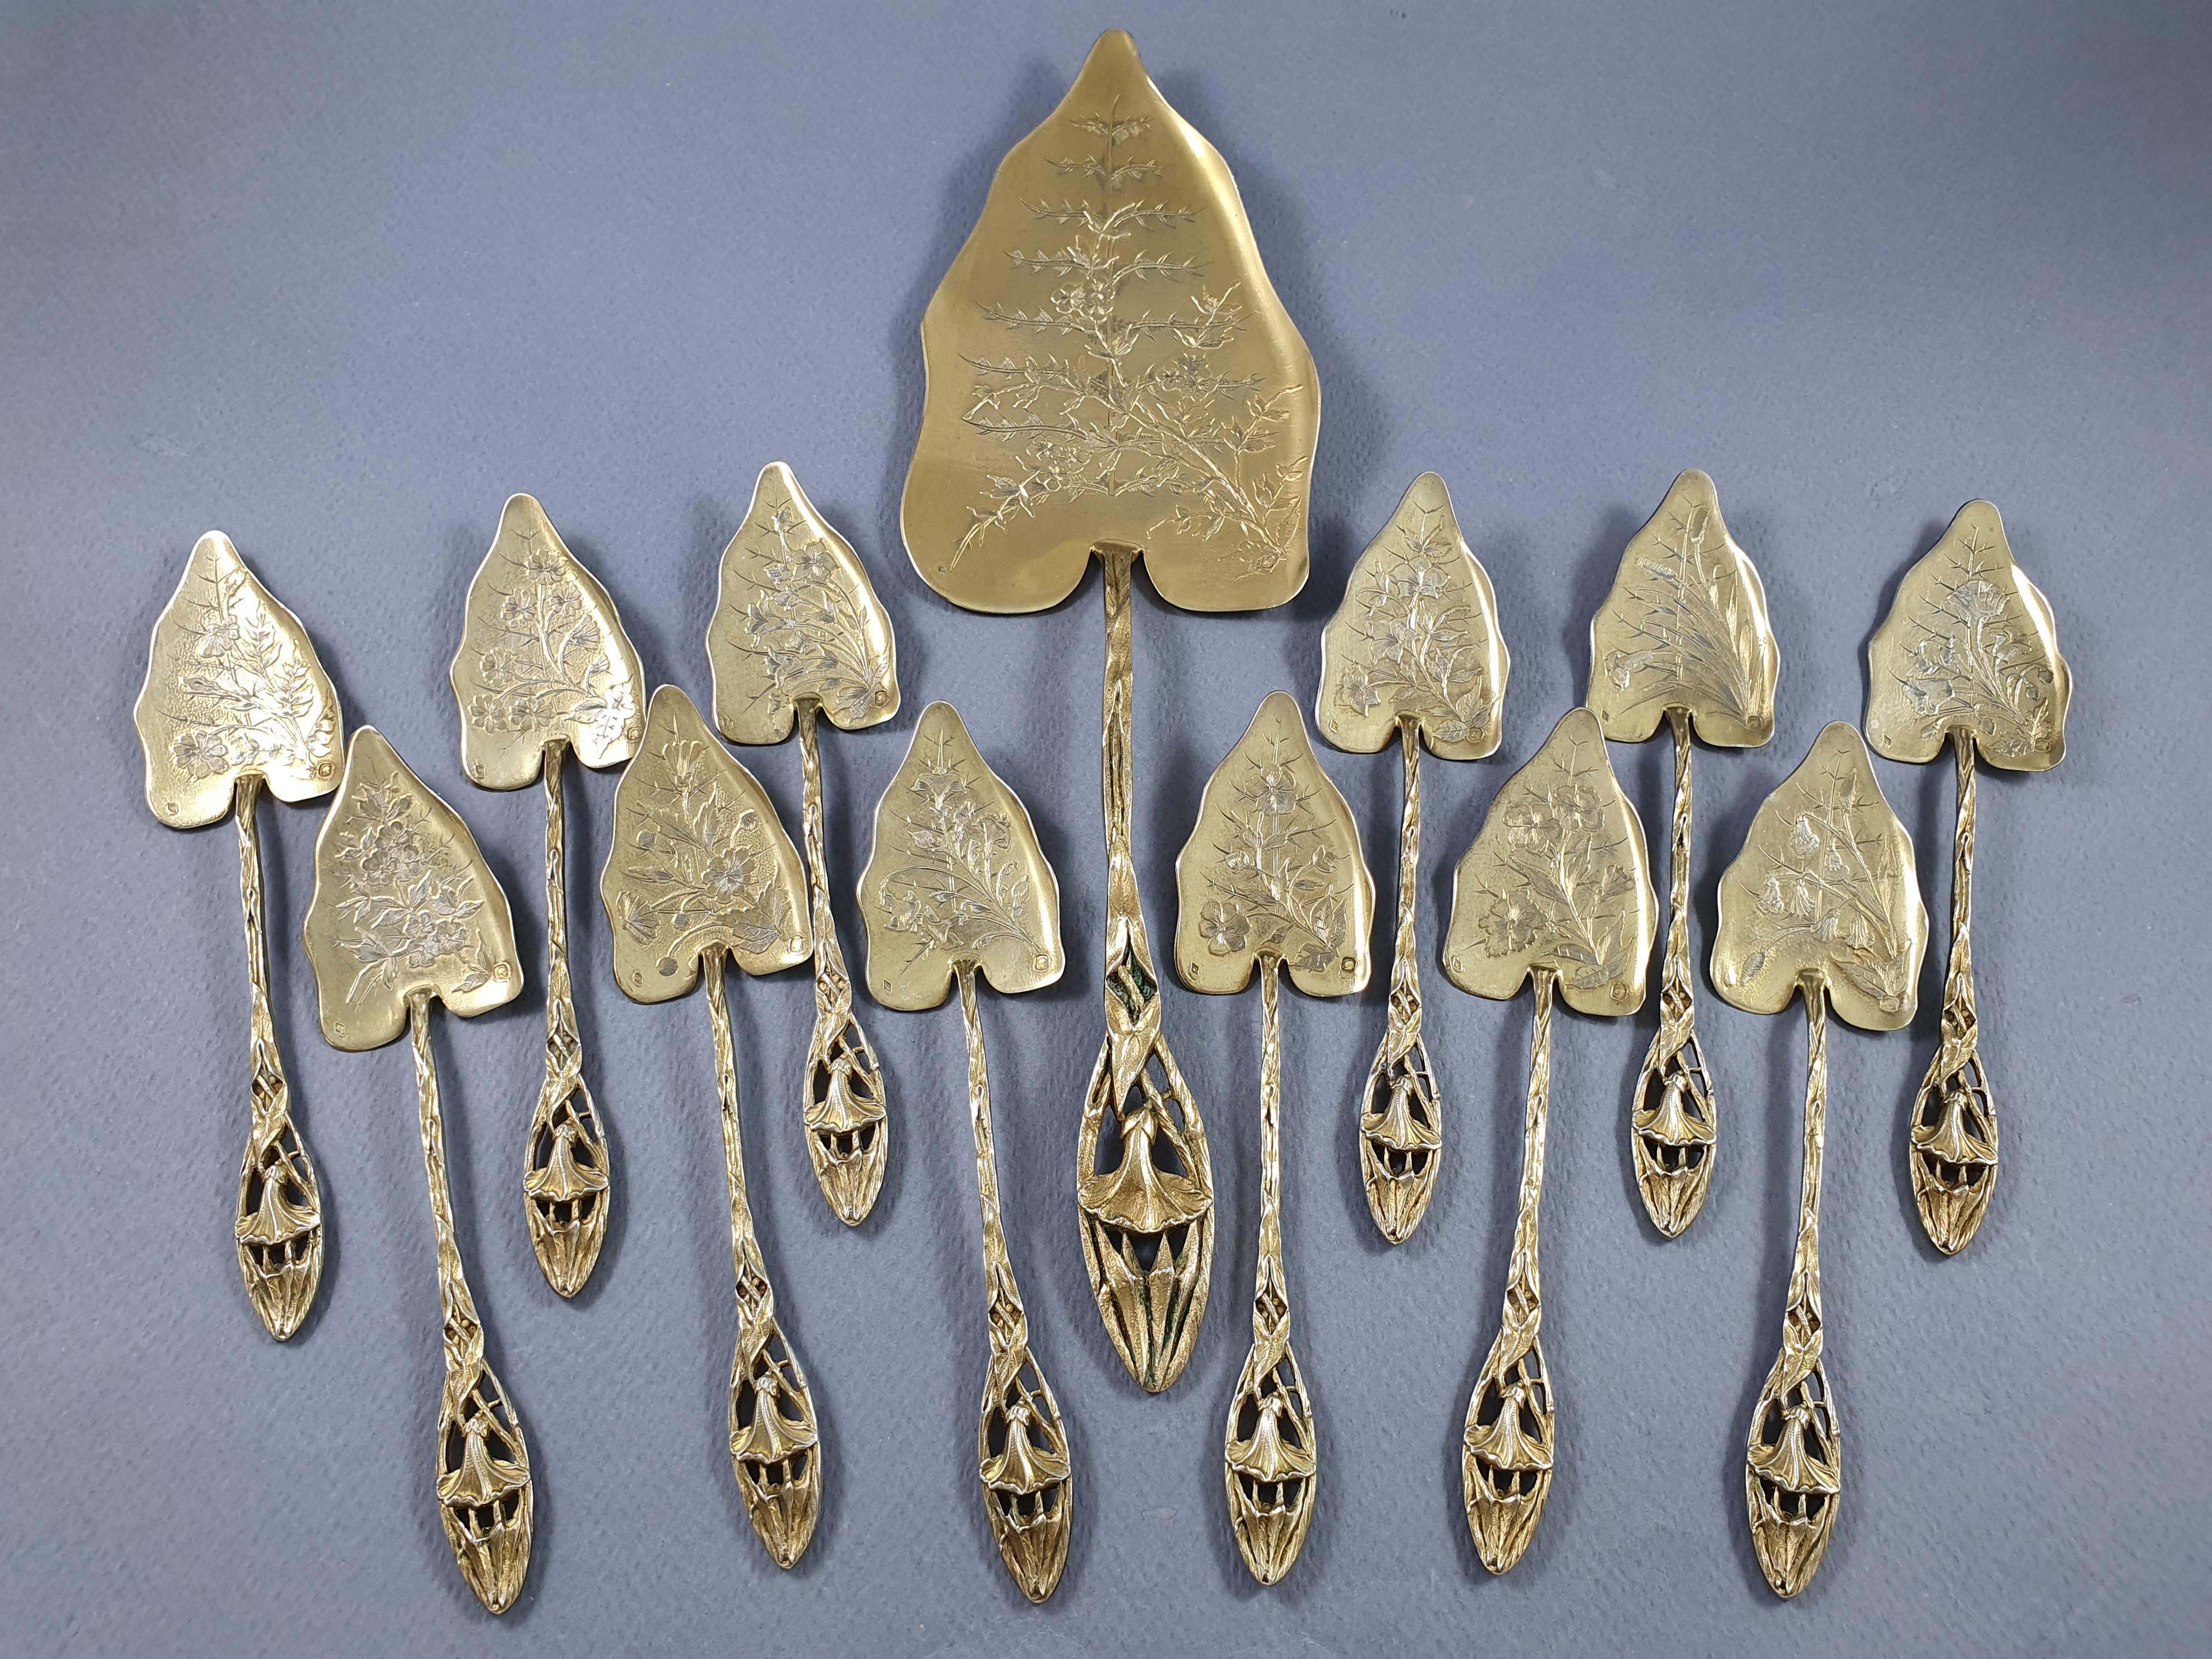 Exceptional sterling silver gilt ice cream service (gold on sterling silver) from the Art Nouveau period 

Composed of a serving piece and 12 spoons 

Each spoon is finely chiseled with a different flower

Serving piece: 26.7 cm - 10.5